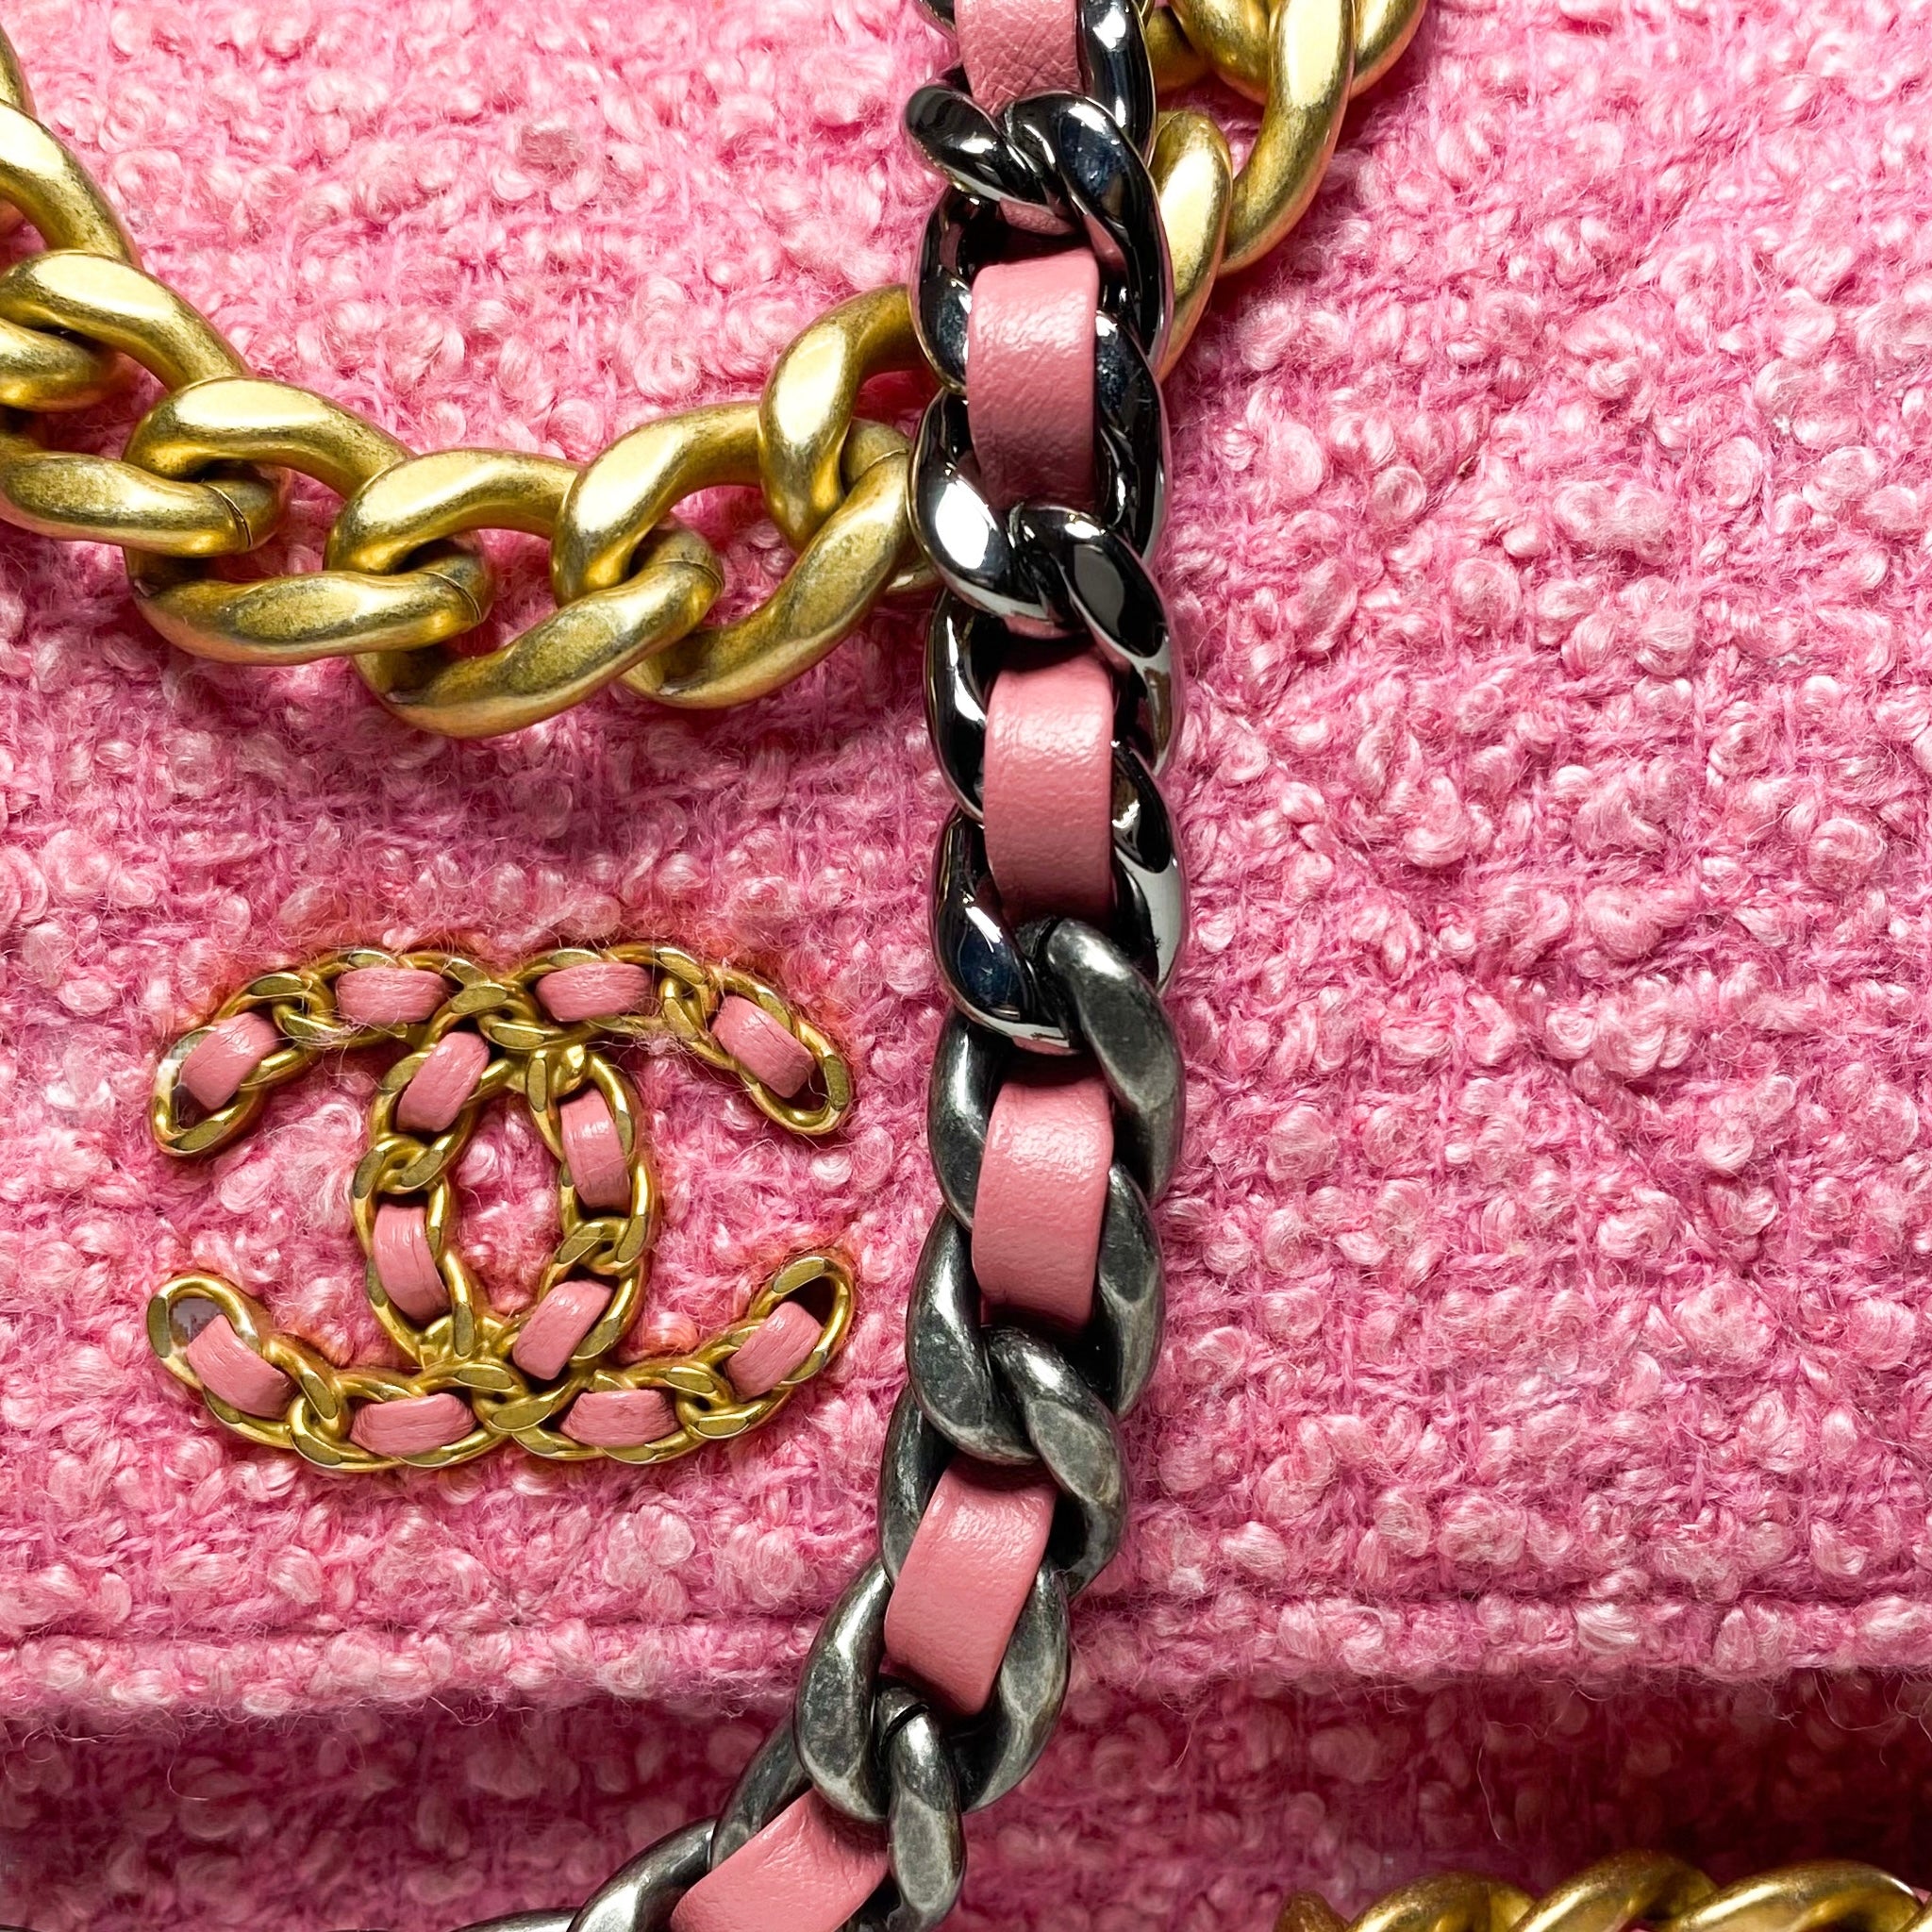 Chanel Archives - Page 3 of 10 - Luxury consignment shop online